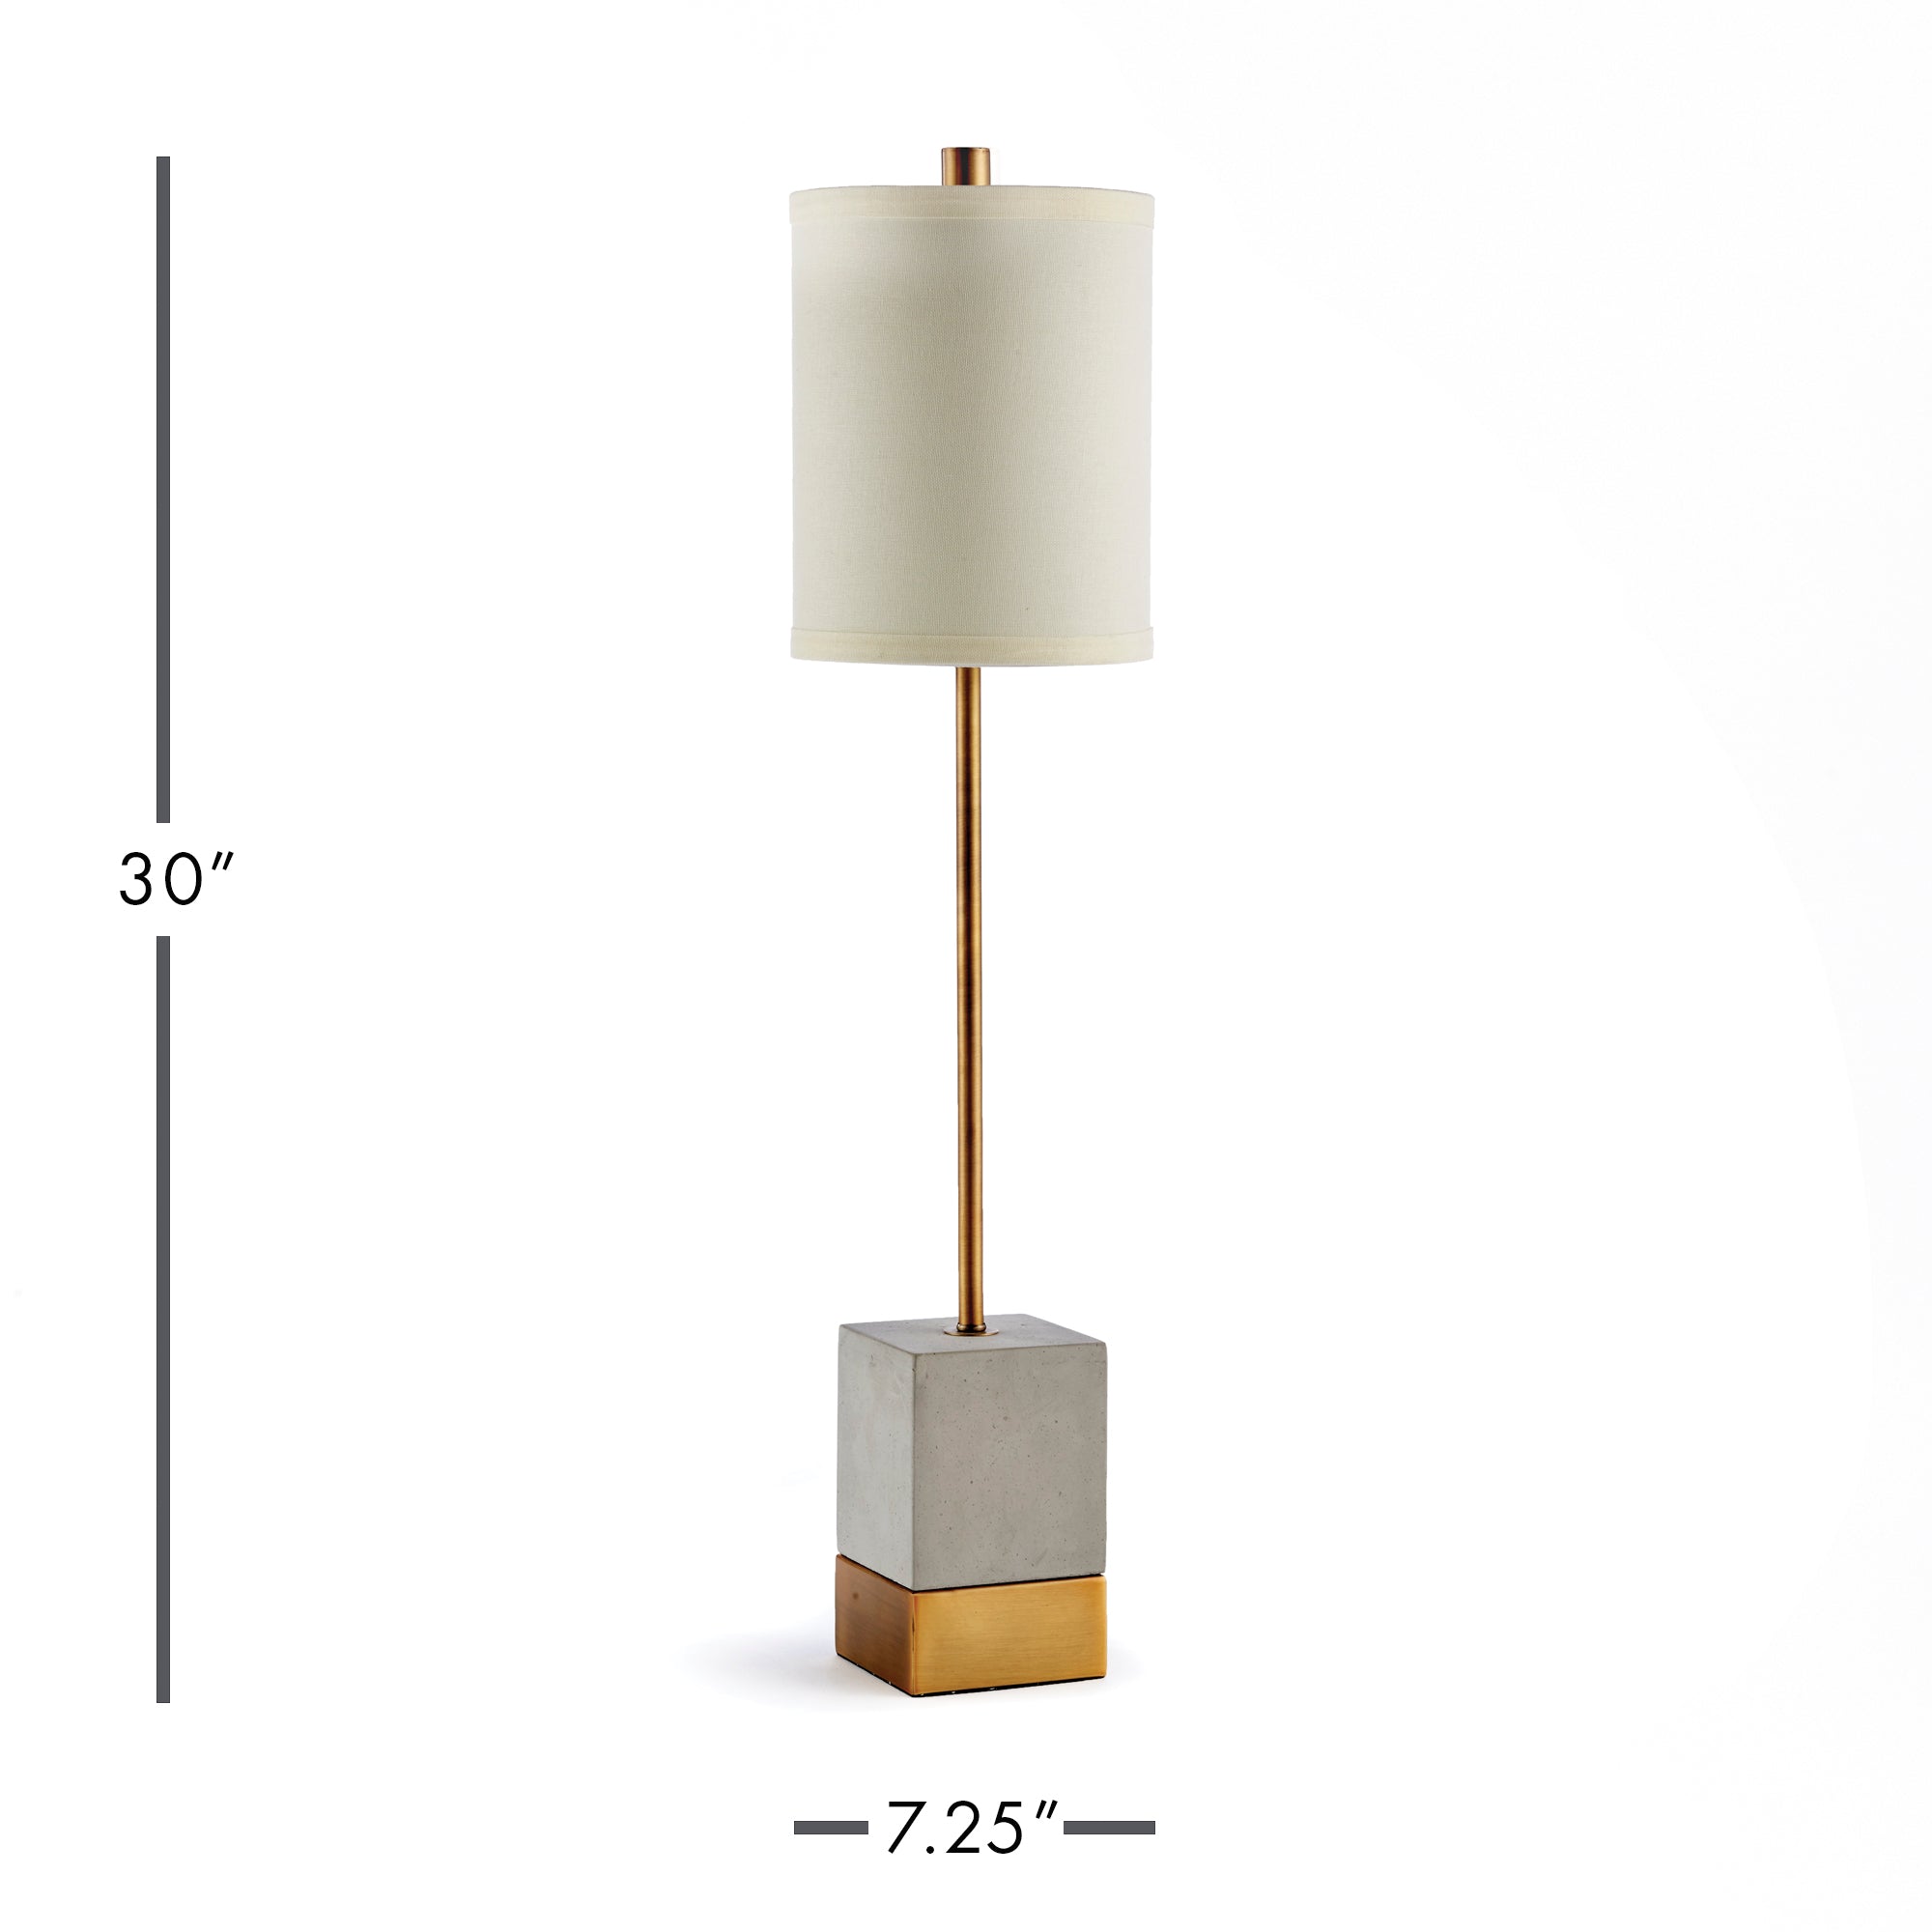 An unexpected mix of cement and brass accents make this lamp a stand out piece. The tall, narrow base and tailored shade are well-designed details not to be missed. Amethyst Home provides interior design, new construction, custom furniture, and area rugs in the Des Moines metro area.